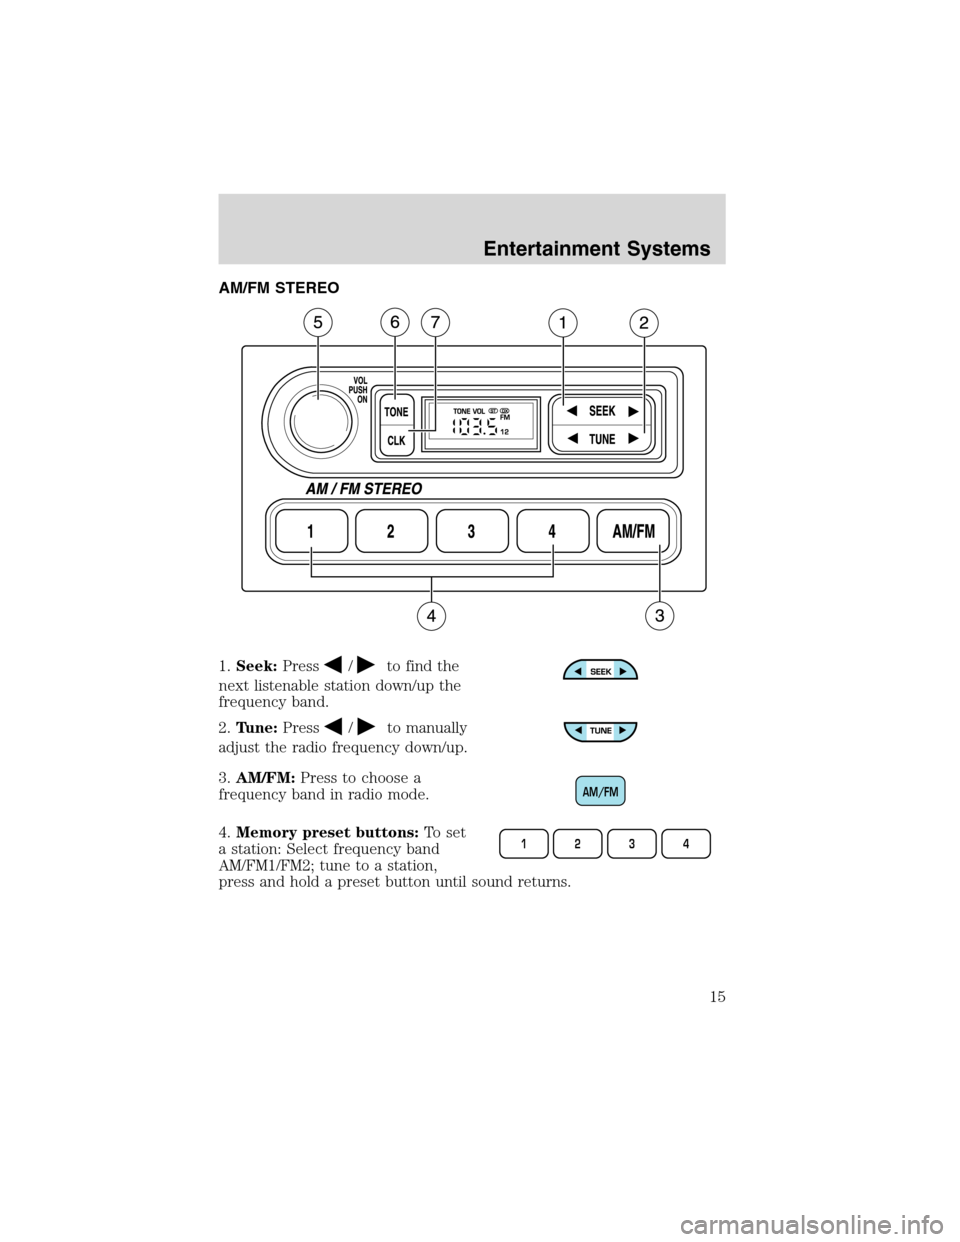 FORD E SERIES 2003 4.G Owners Manual AM/FM STEREO
1.Seek:Press
/to find the
next listenable station down/up the
frequency band.
2.Tune:Press
/to manually
adjust the radio frequency down/up.
3.AM/FM:Press to choose a
frequency band in rad